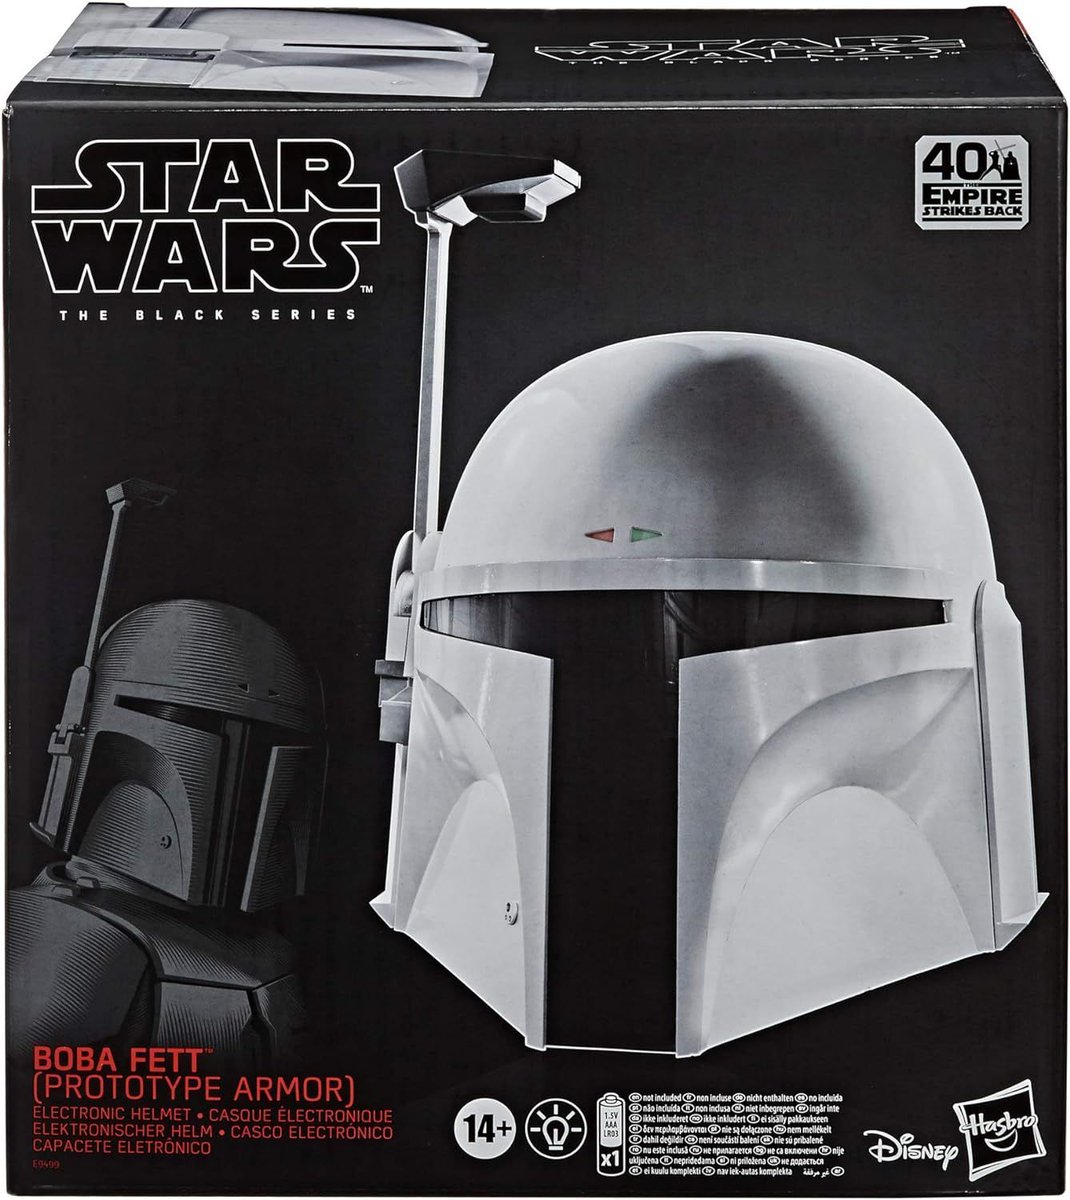 Hasbro's 'Prototype' #BobaFett helmet is back in stock at Amazon: bobafett.club/srjg4 This one was initially released in 2020, sold out in 2021, and is back for 2024 at its original price #StarWars #Cosplay #Ad